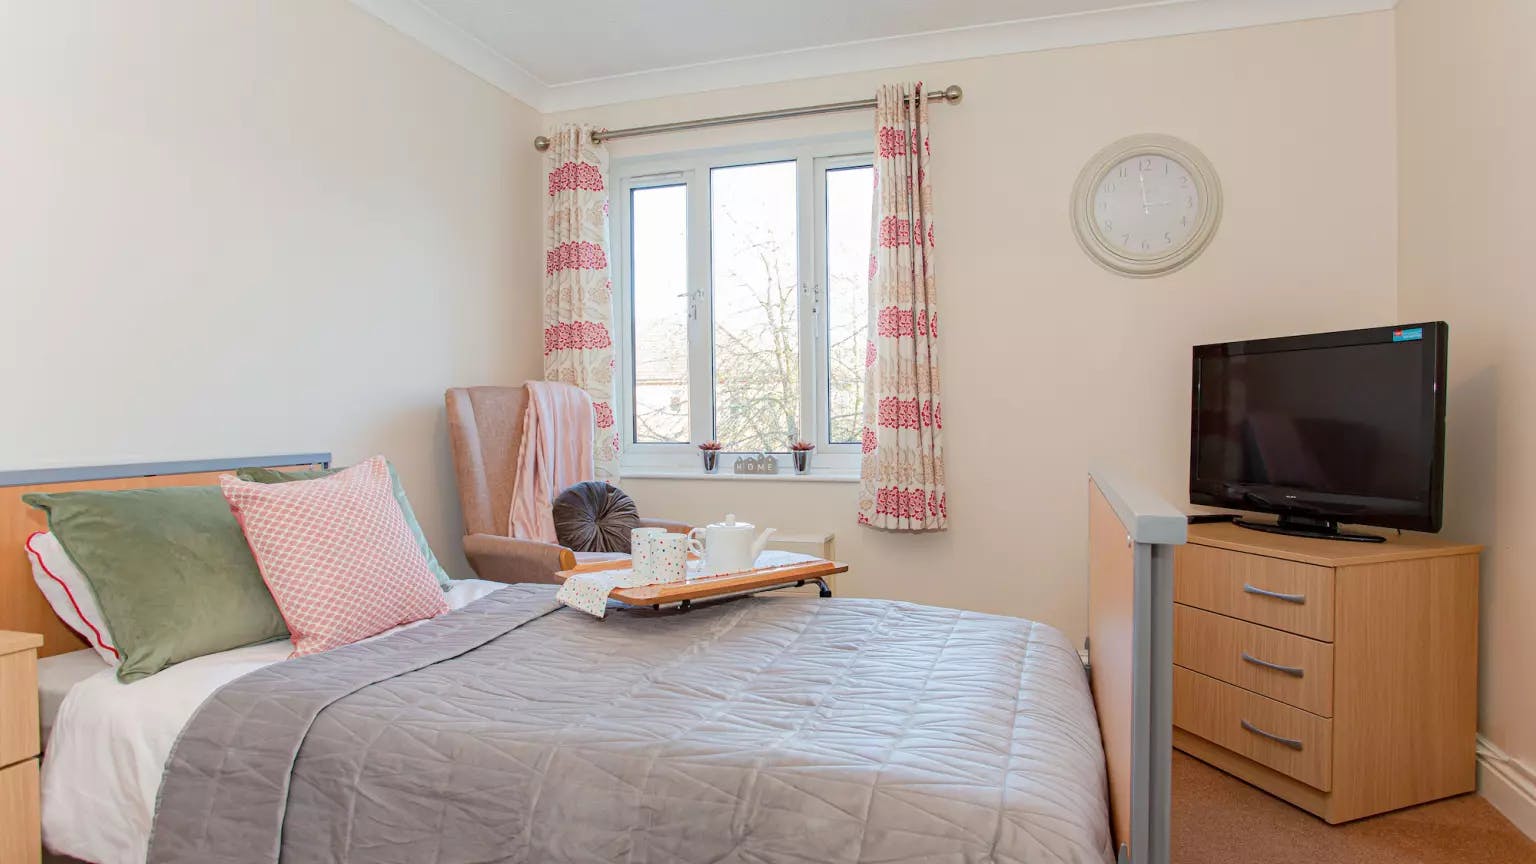 Bedroom of Mayfair Lodge care home in Watkins Rise, Hertfordshire